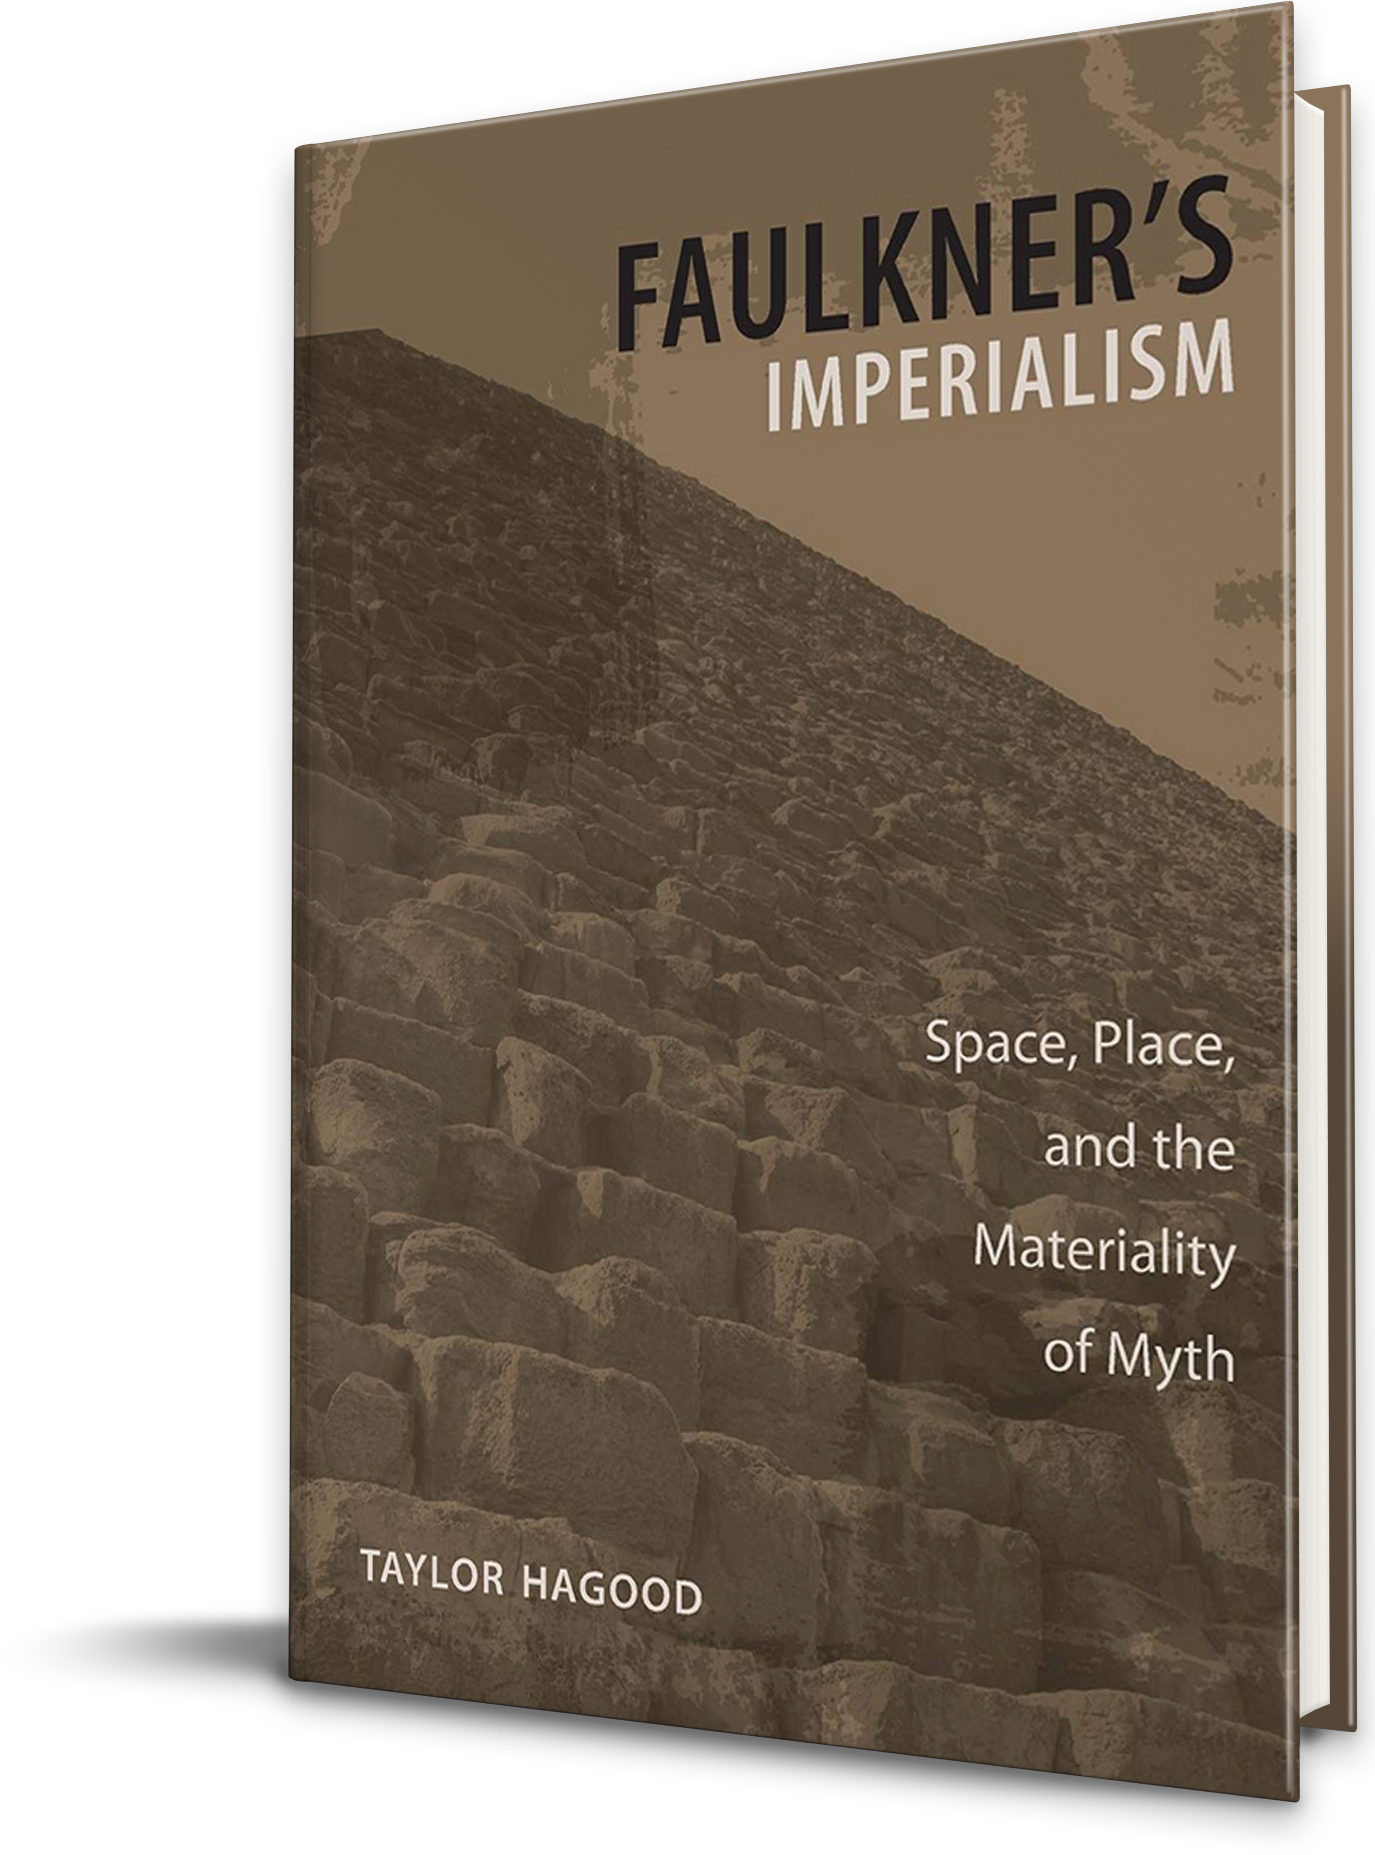 Faulkner's Imperialism: Space, Place, and the Materiality of Myth